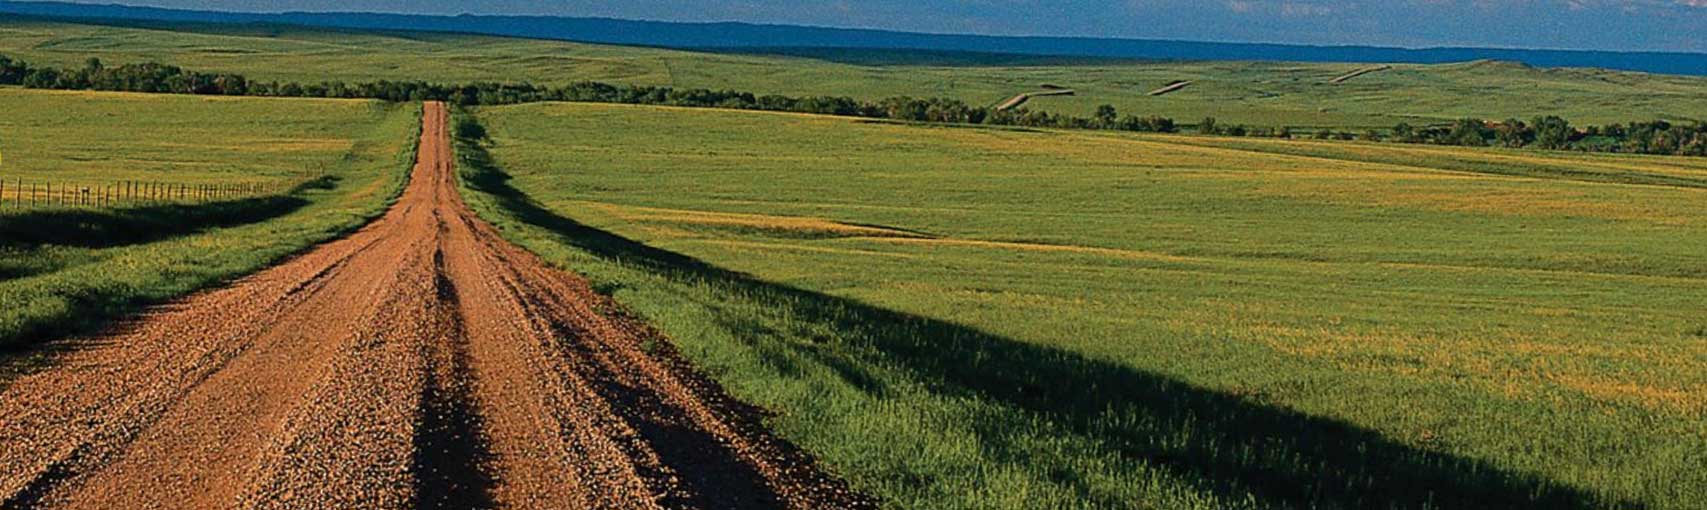 A long dirt road forges a path through the green pastures of Nebraska.  What adventures lie just over the horizon?